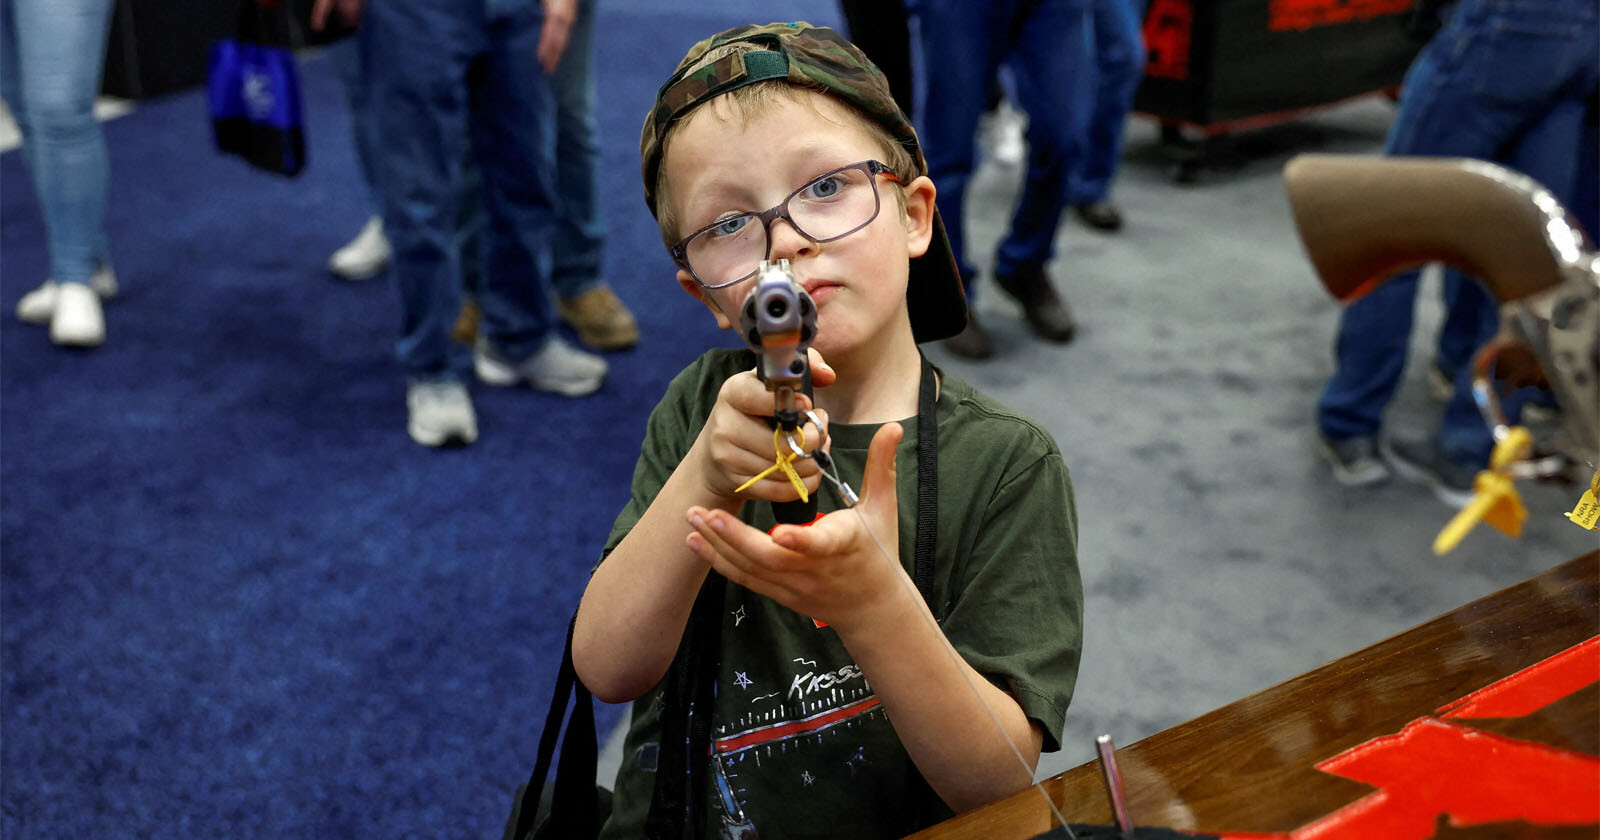  photo 6-year-old boy pointing gun camera nra event 